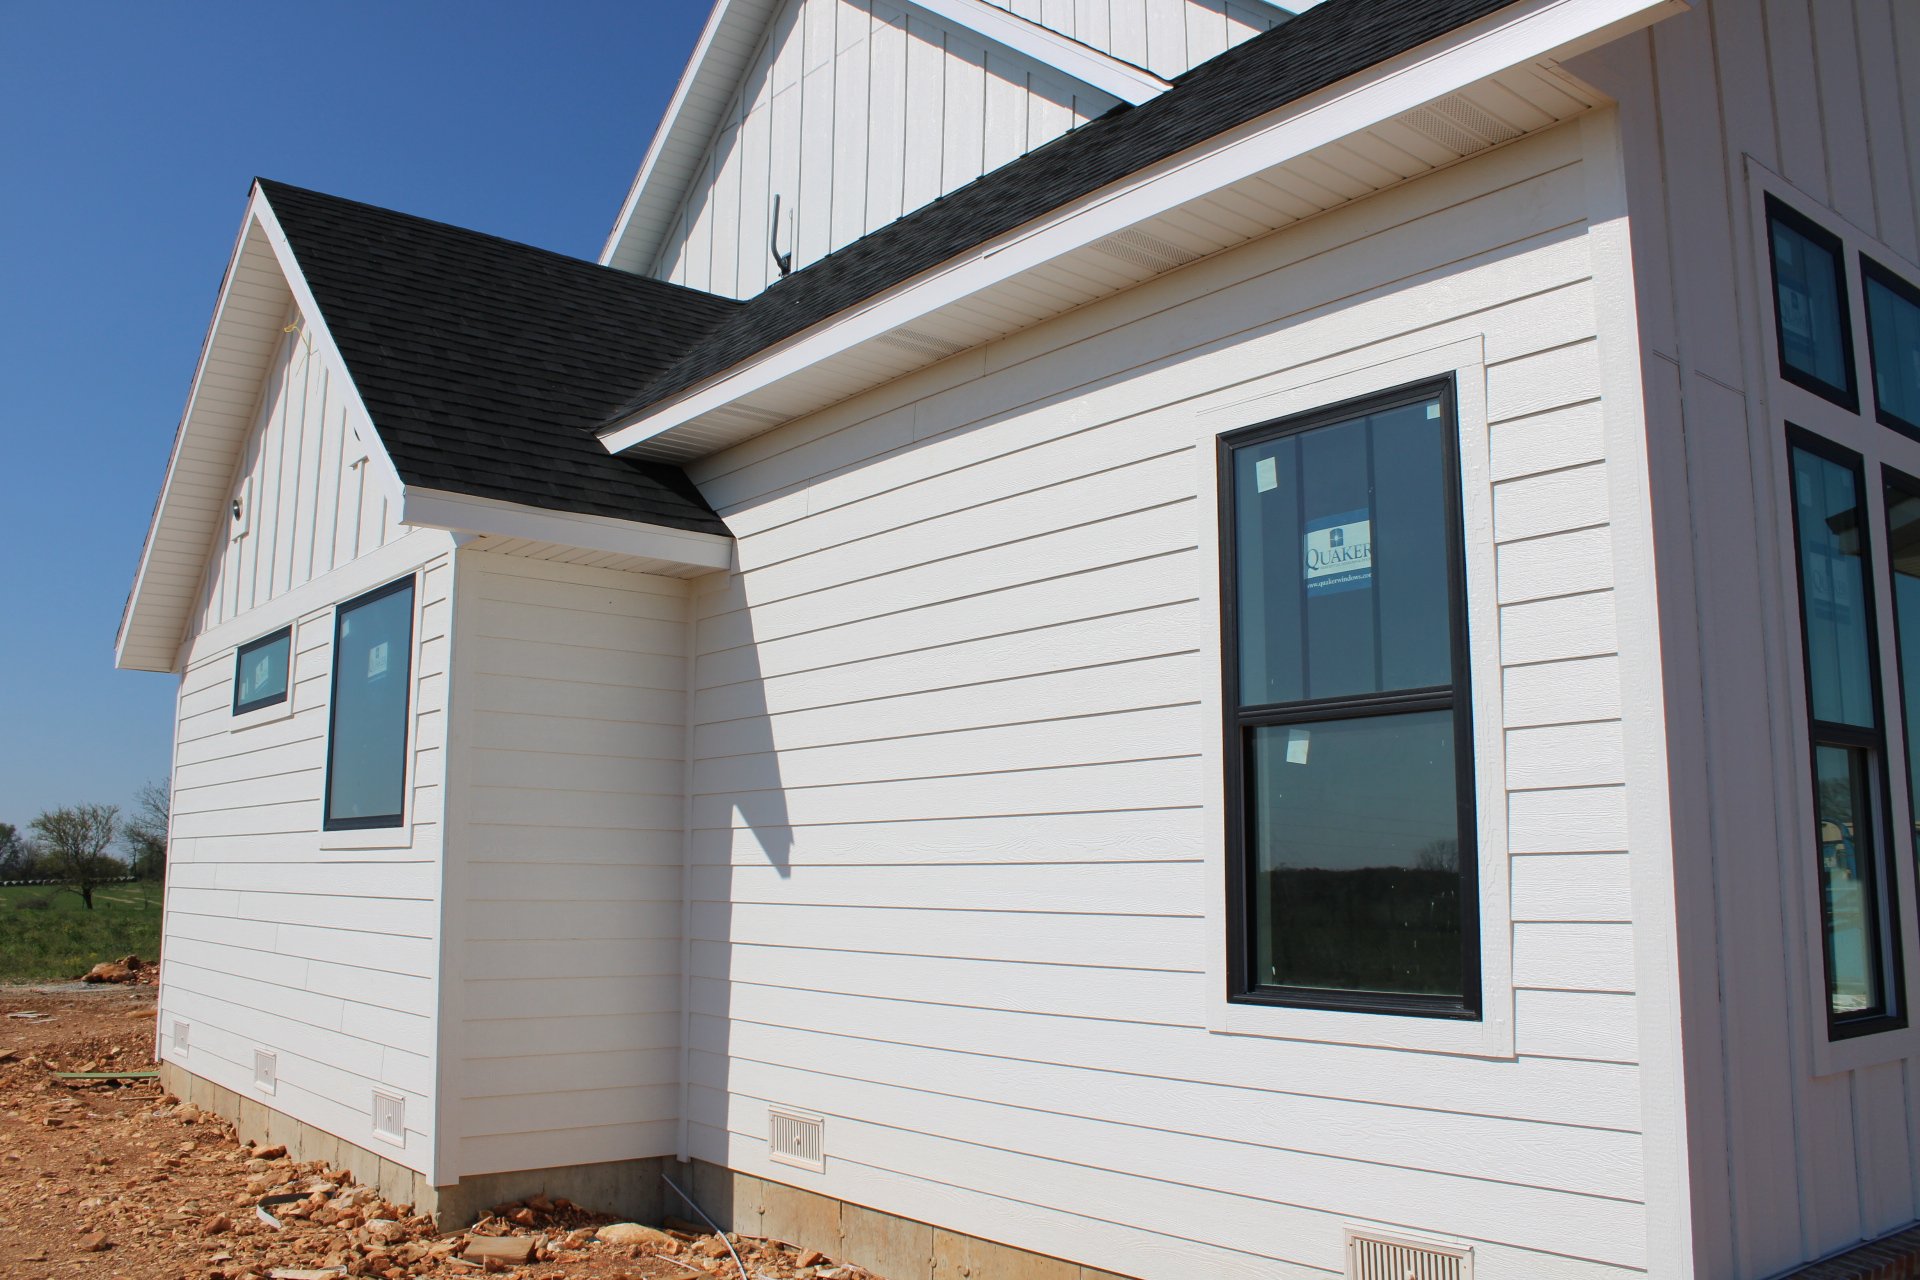 🏠 Ready to refresh your home's exterior?
-
Southwestern Exteriors specializes in a variety of siding options, including Vinyl, LP SmartSide, Fiber Cement, and Metal siding options. Transform your home's look and durability with our expert installati